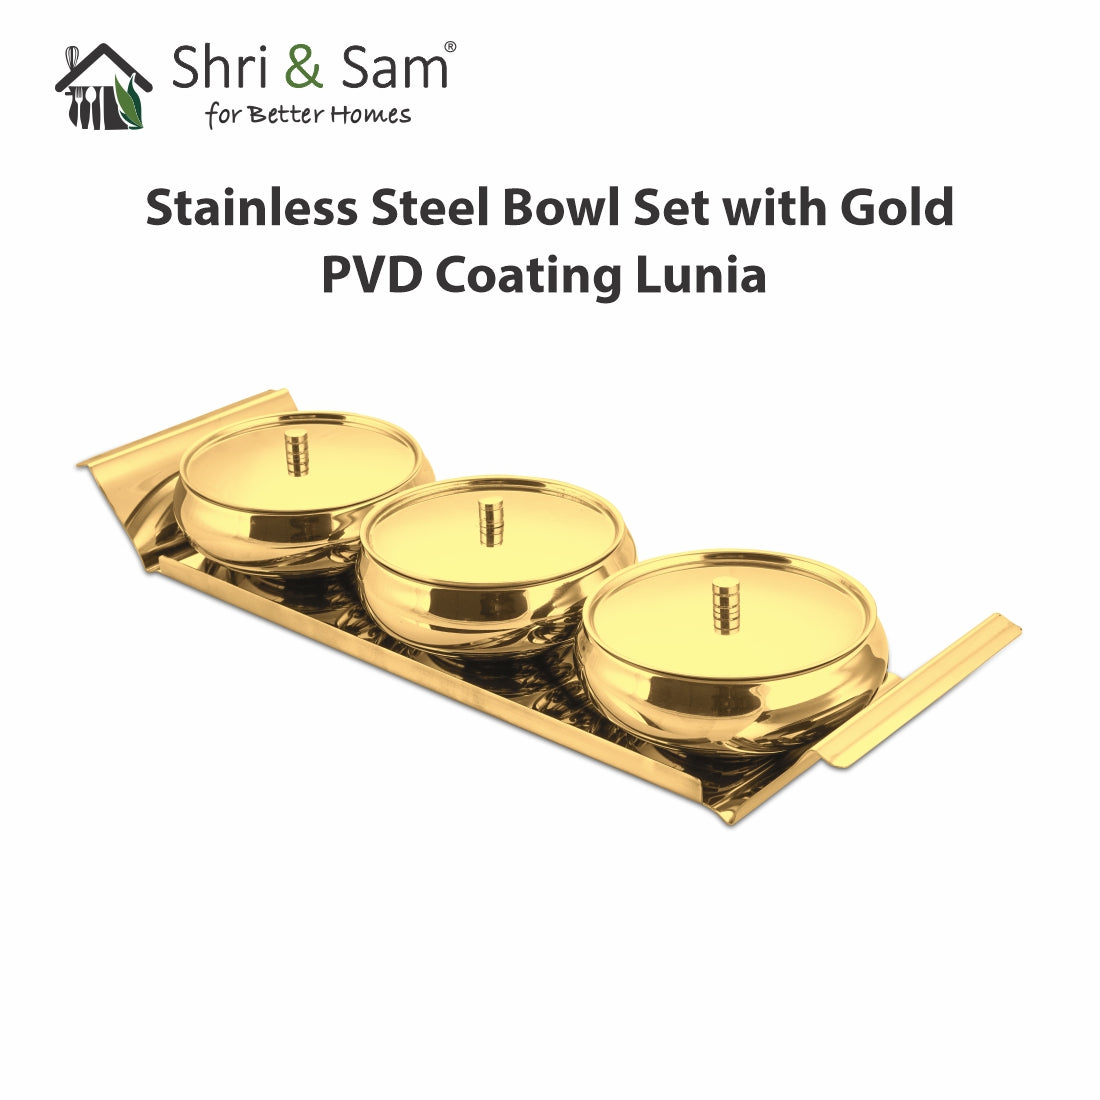 Stainless Steel Bowl Set with Gold PVD Coating Lunia